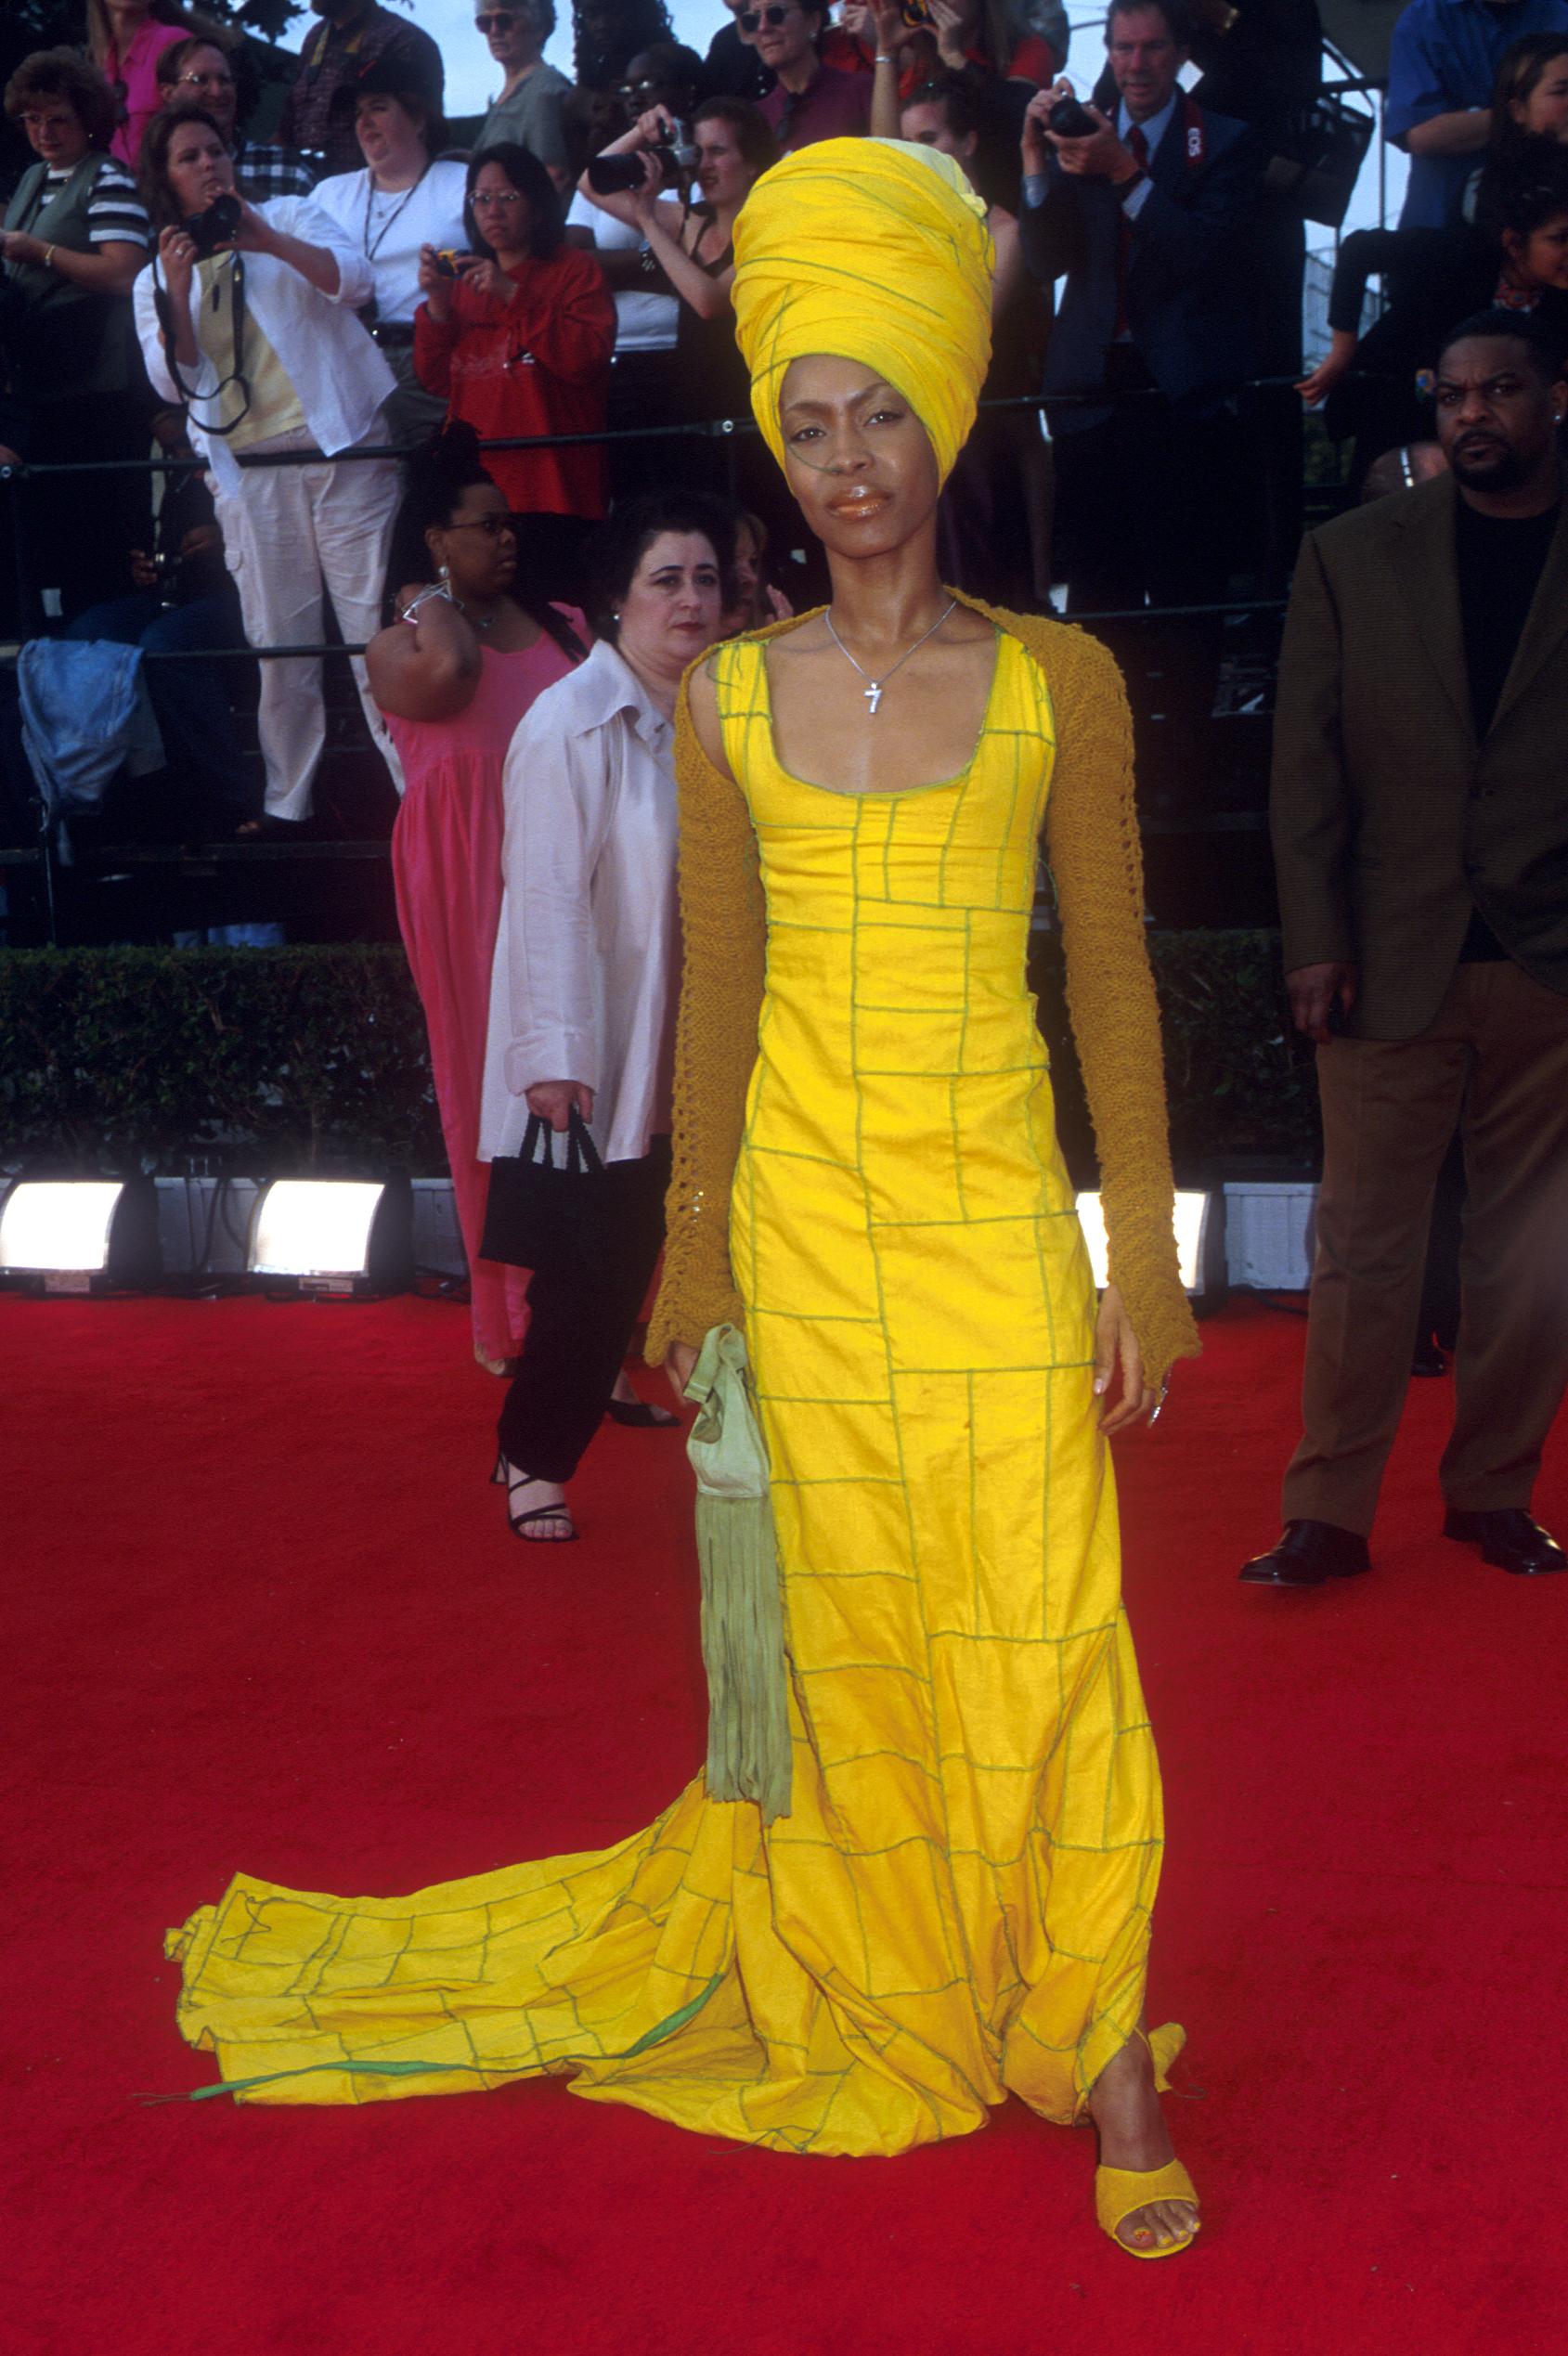 These Are The Top 25 Iconic Fashion Moments From Female MCs 